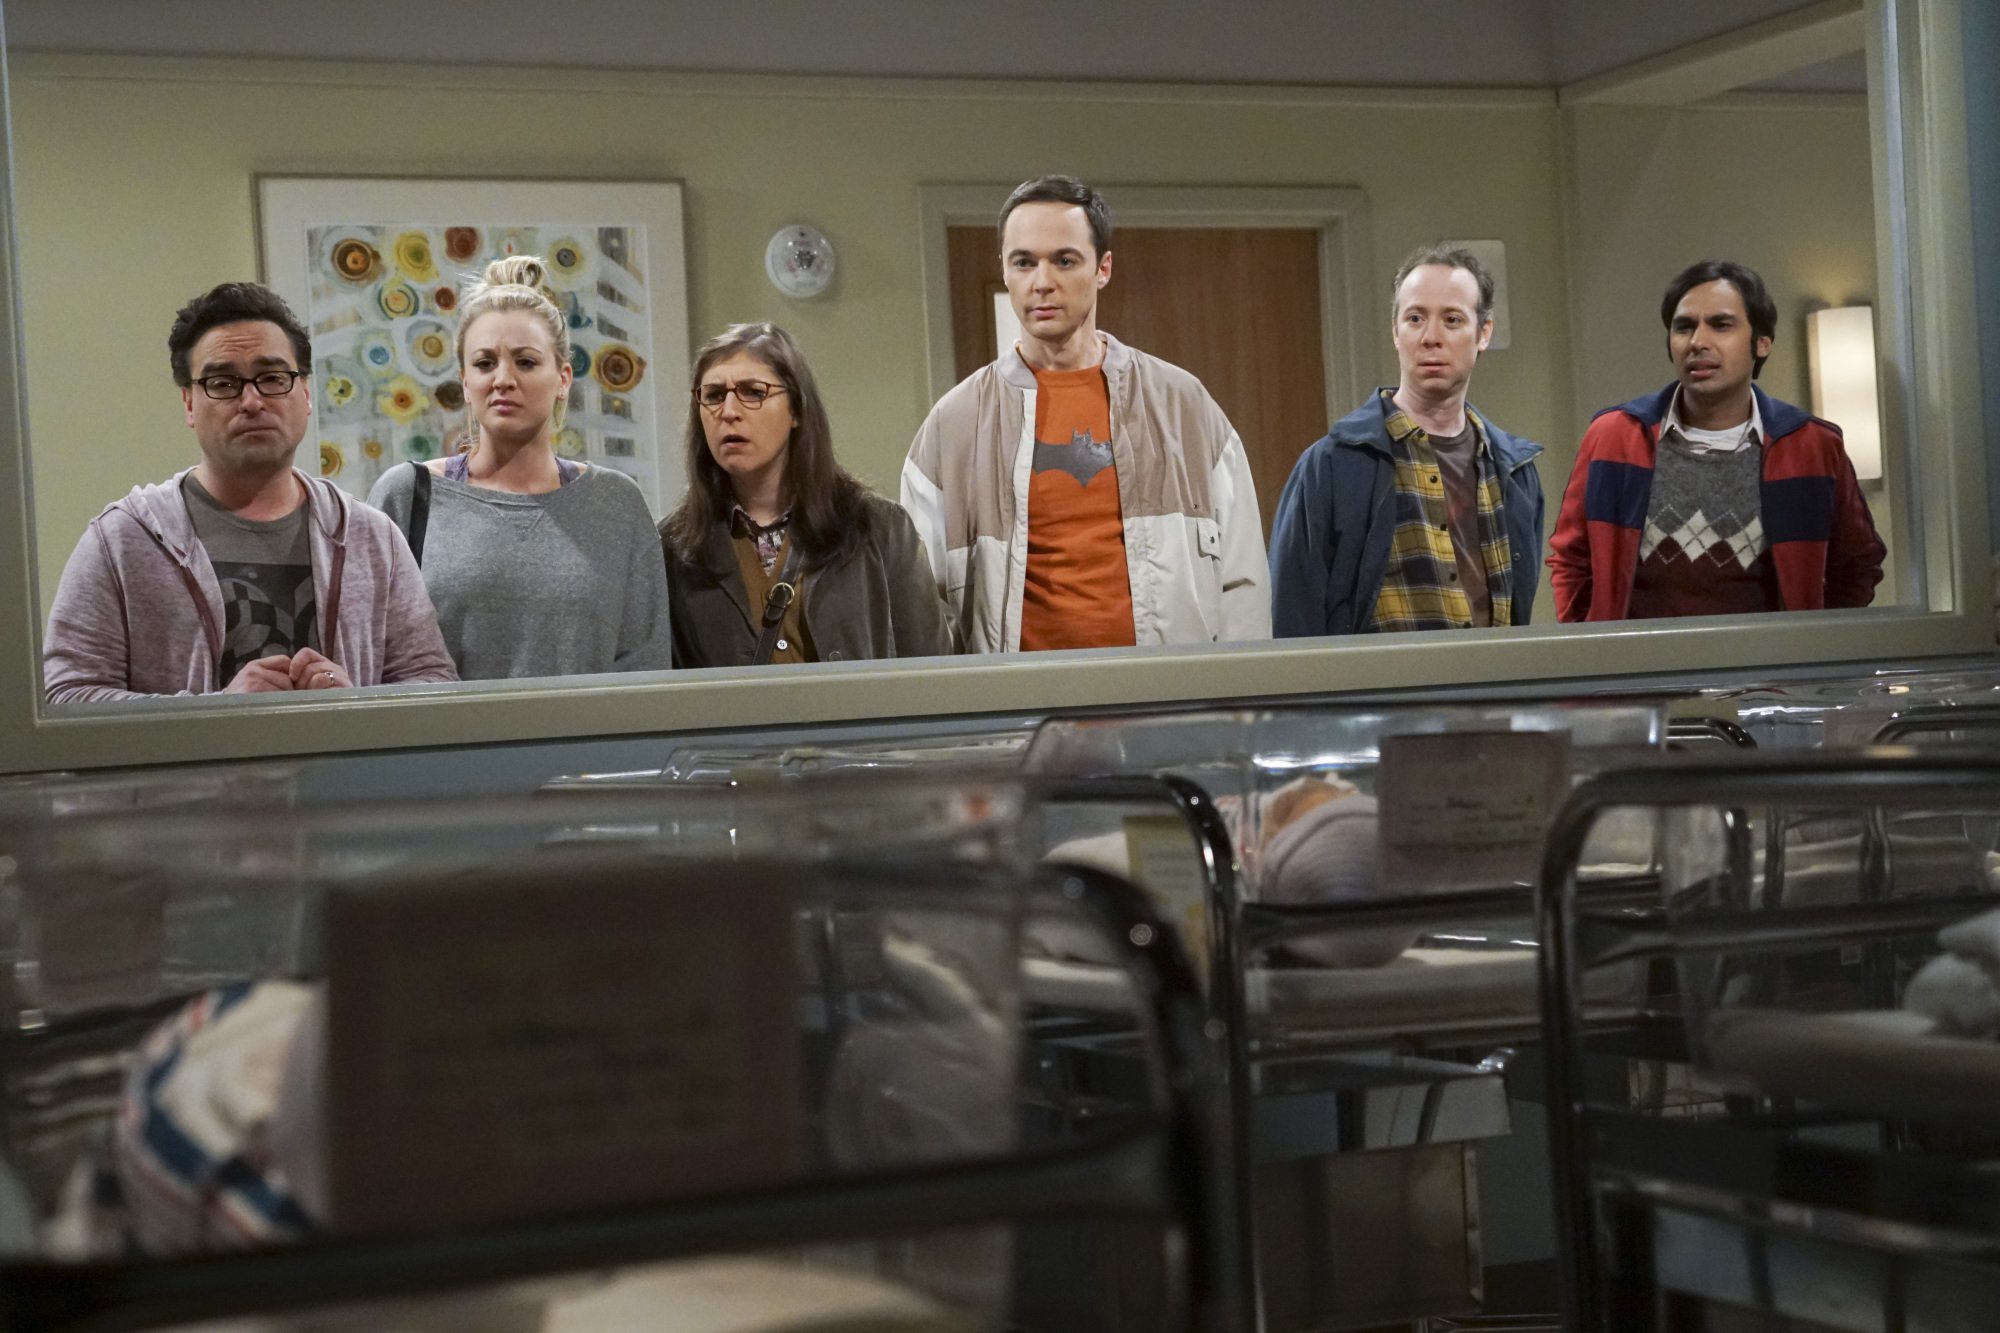 Cast of 'The Big Bang Theory'